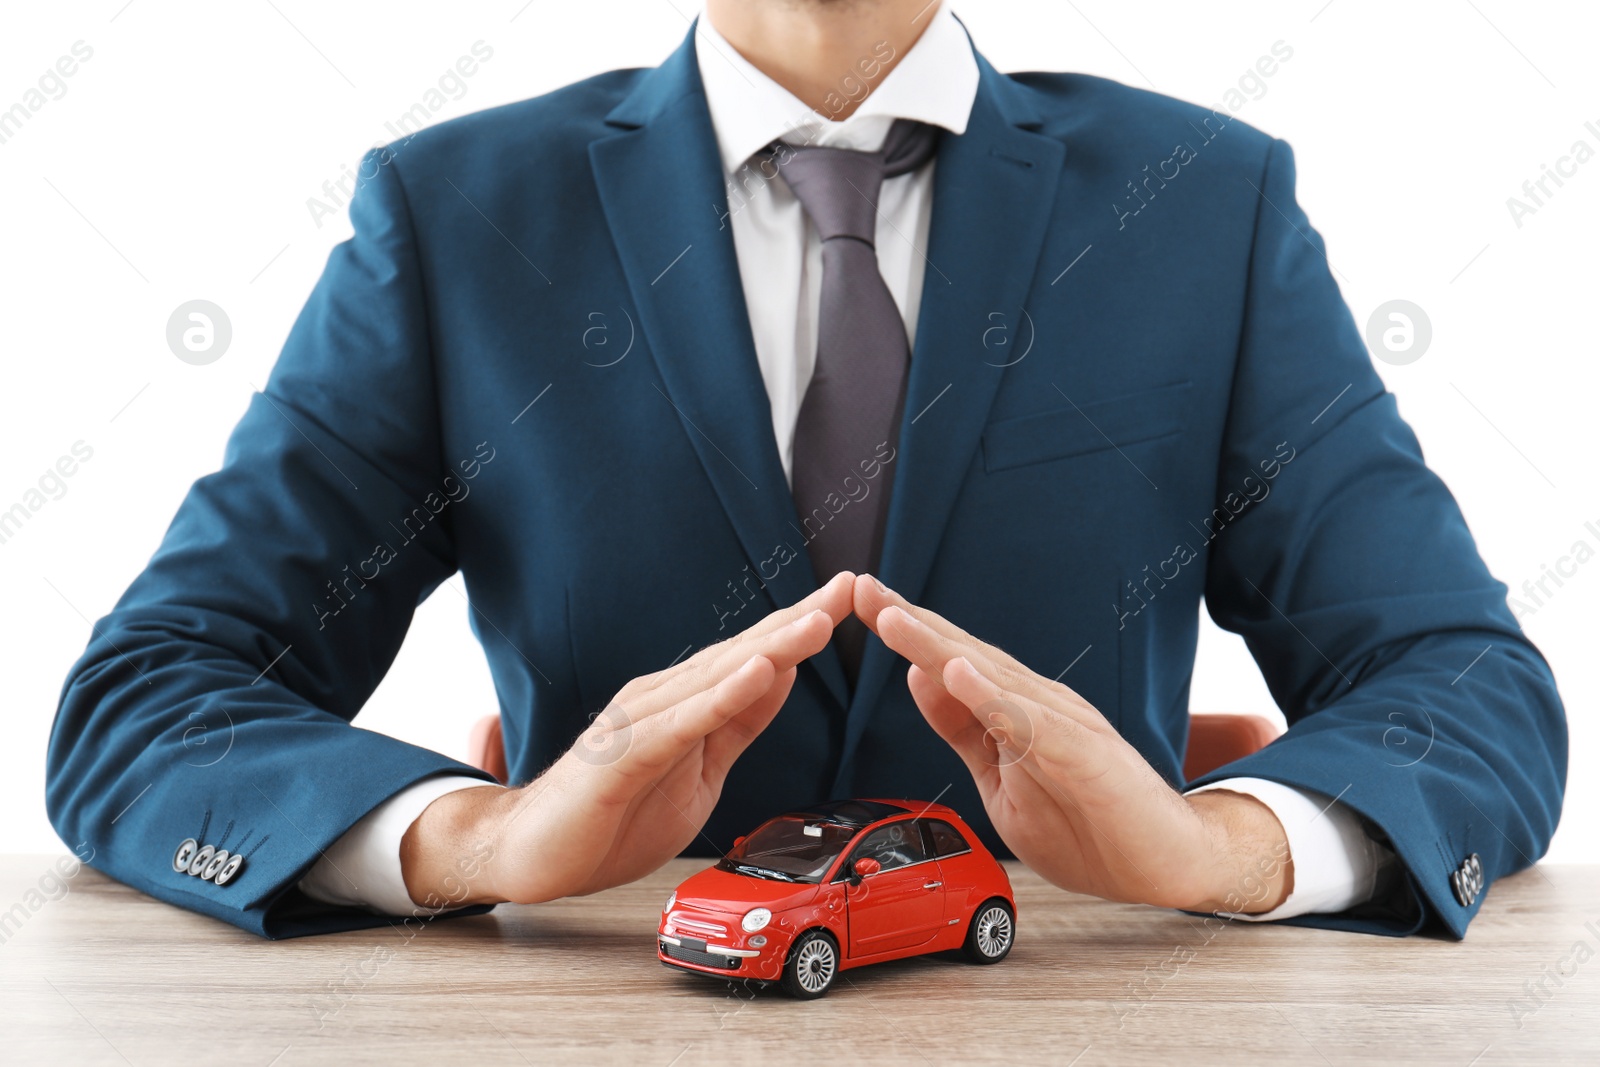 Photo of Insurance agent covering toy car on table against white background